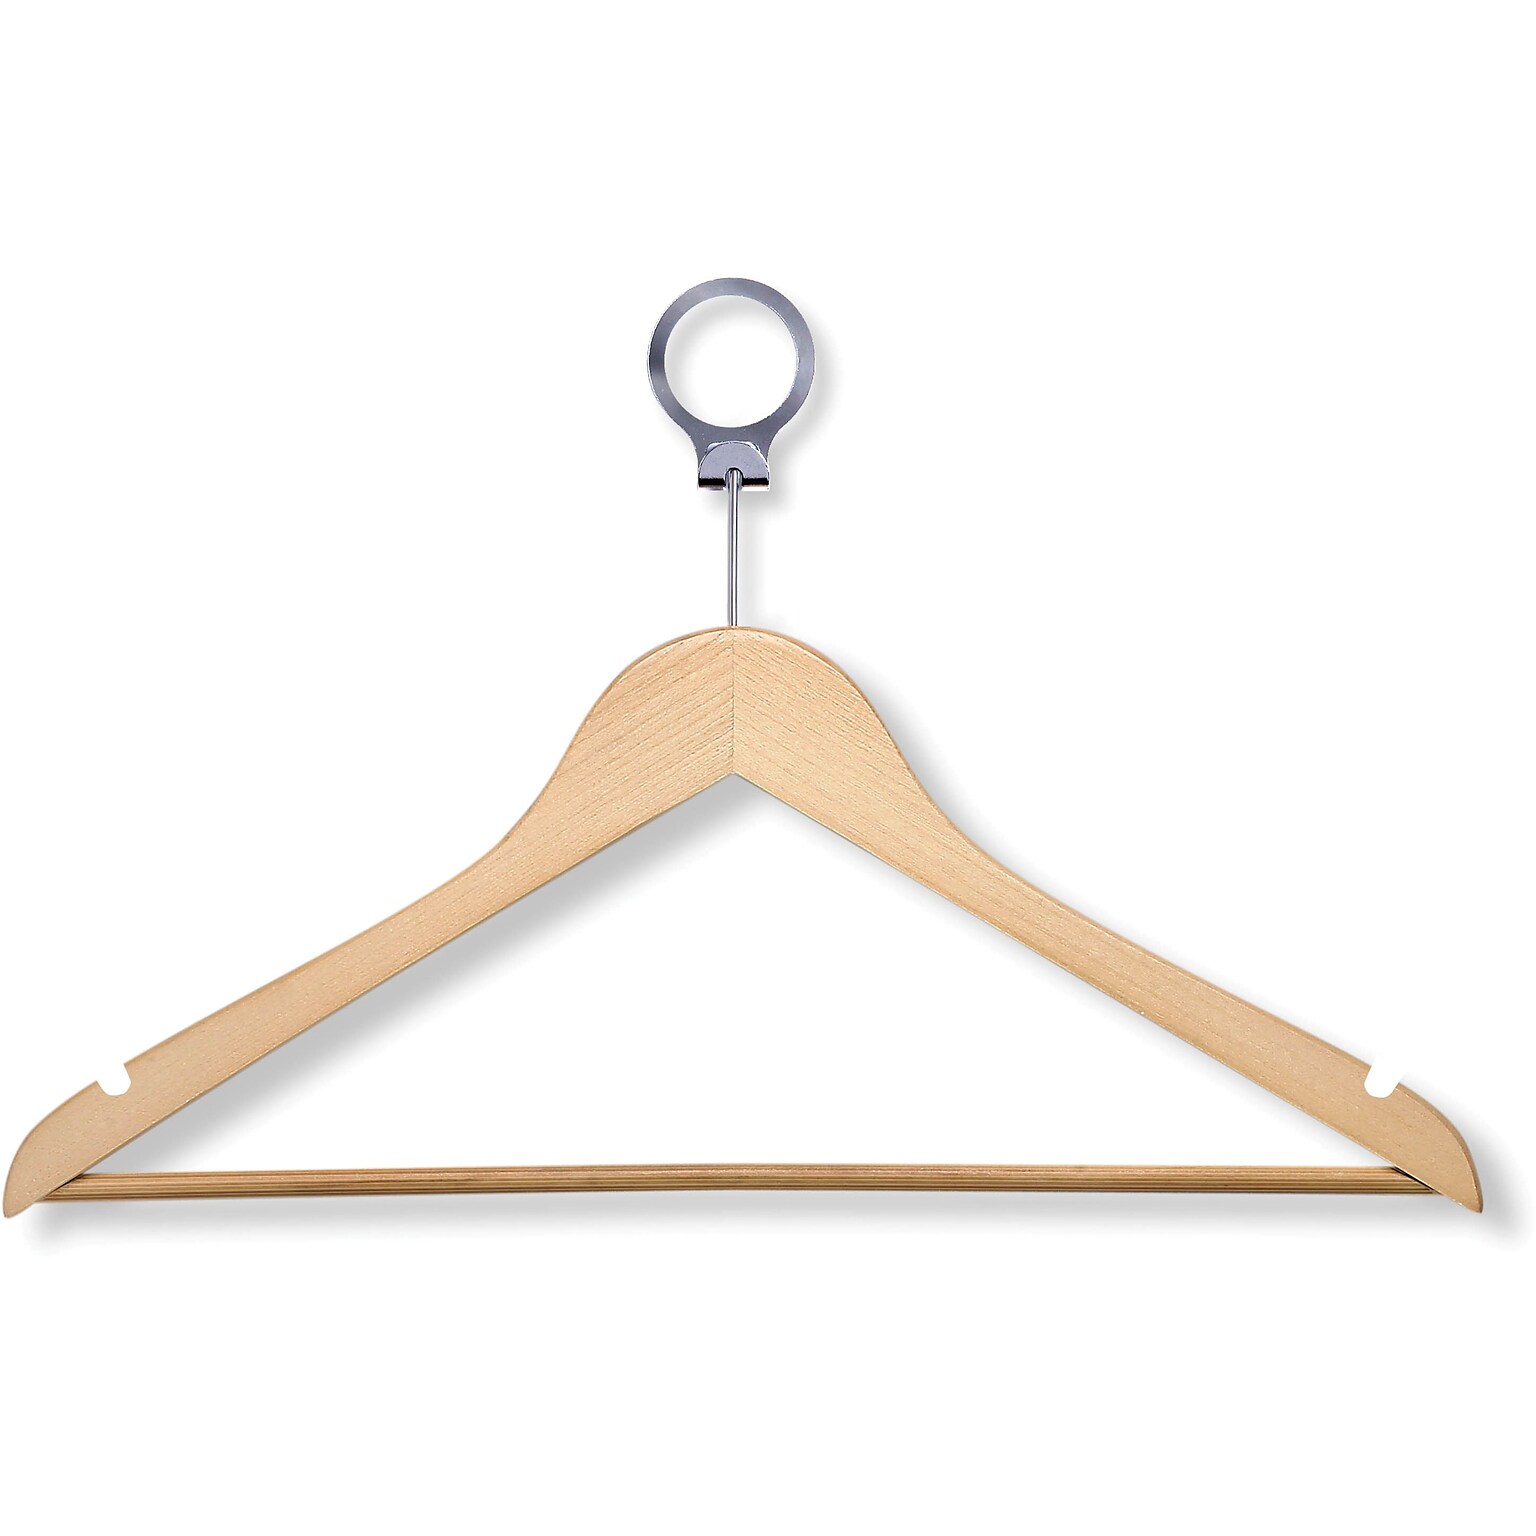 Honey Can Do 24 Pack Hotel Suit Hangers, Maple, 24/Pack